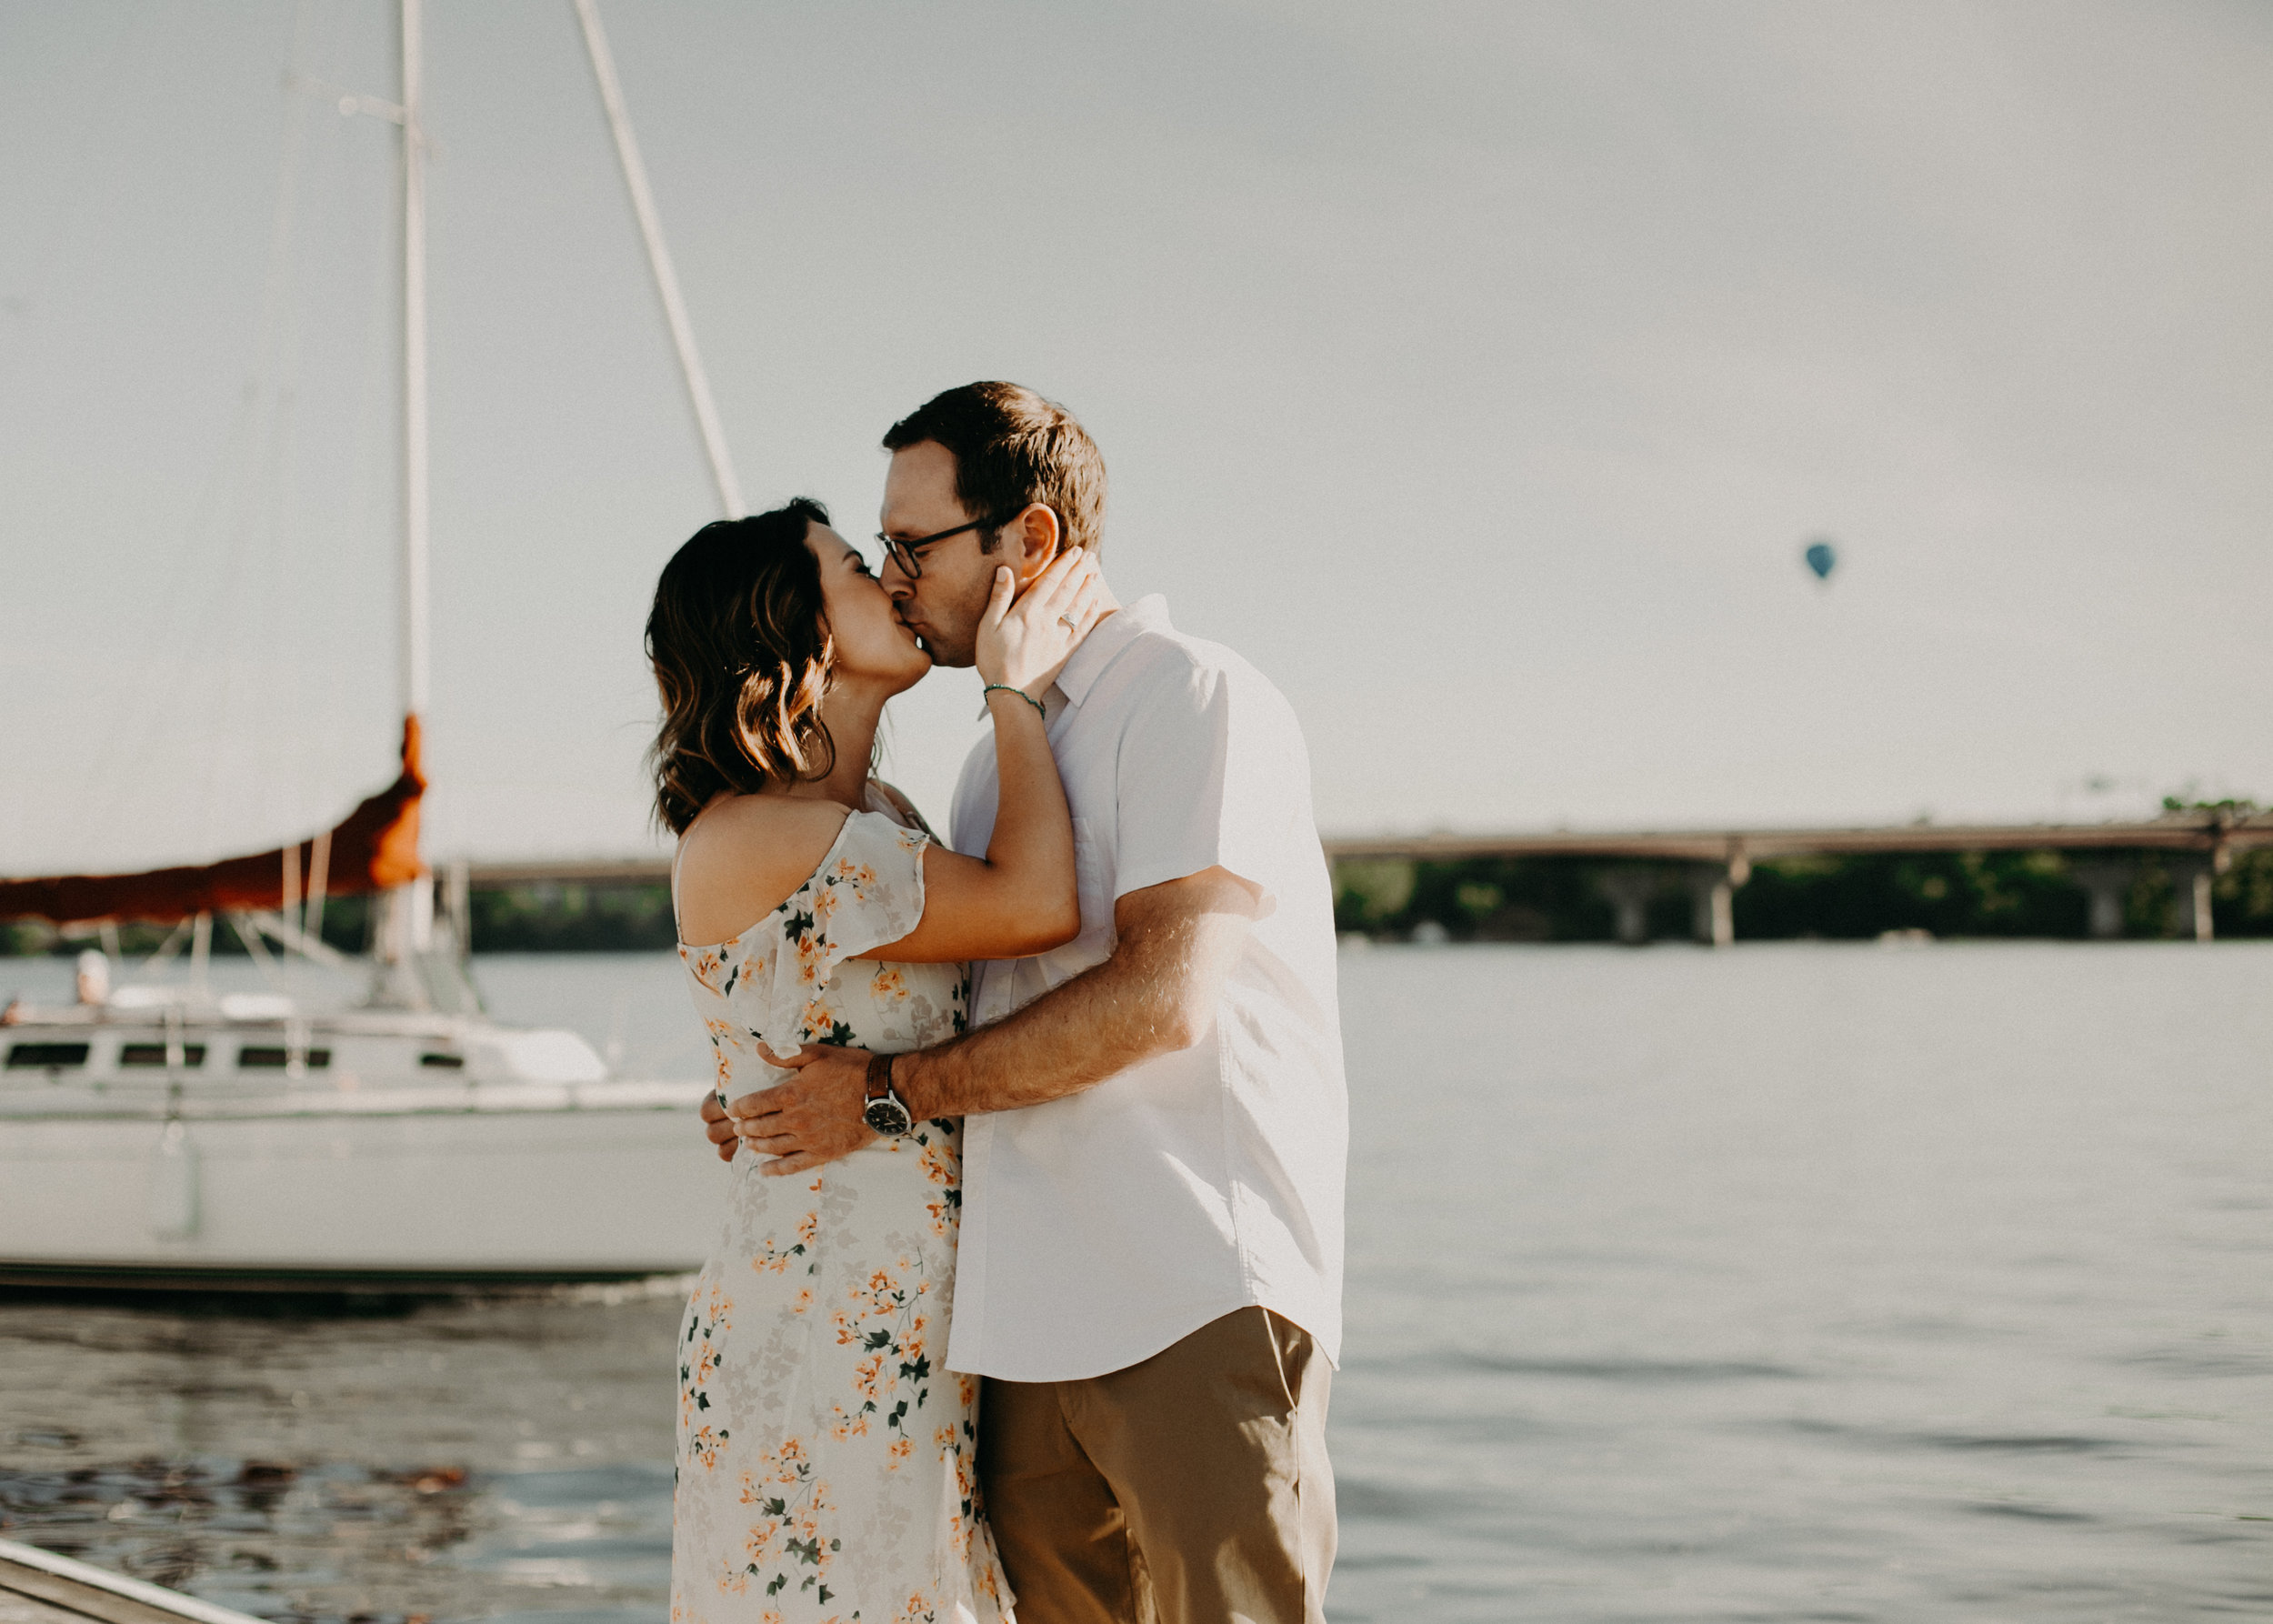  Andrea Wagner Photography captures real and intimate moments between an engaged couple in Hudson WI at the St Croix Marina 